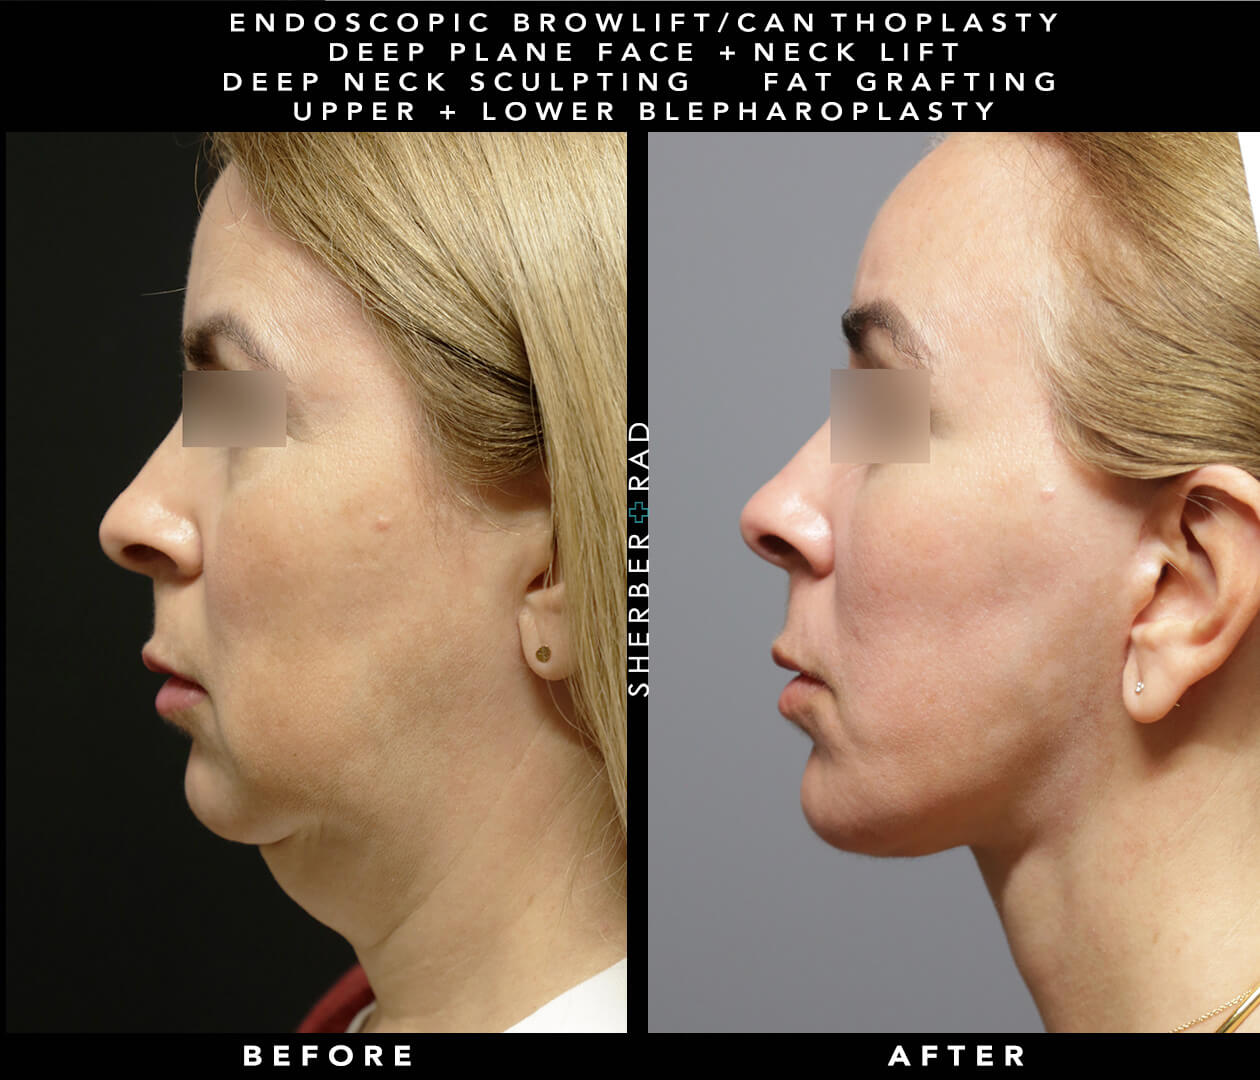 Deep Neck Sculpting Before and After Results